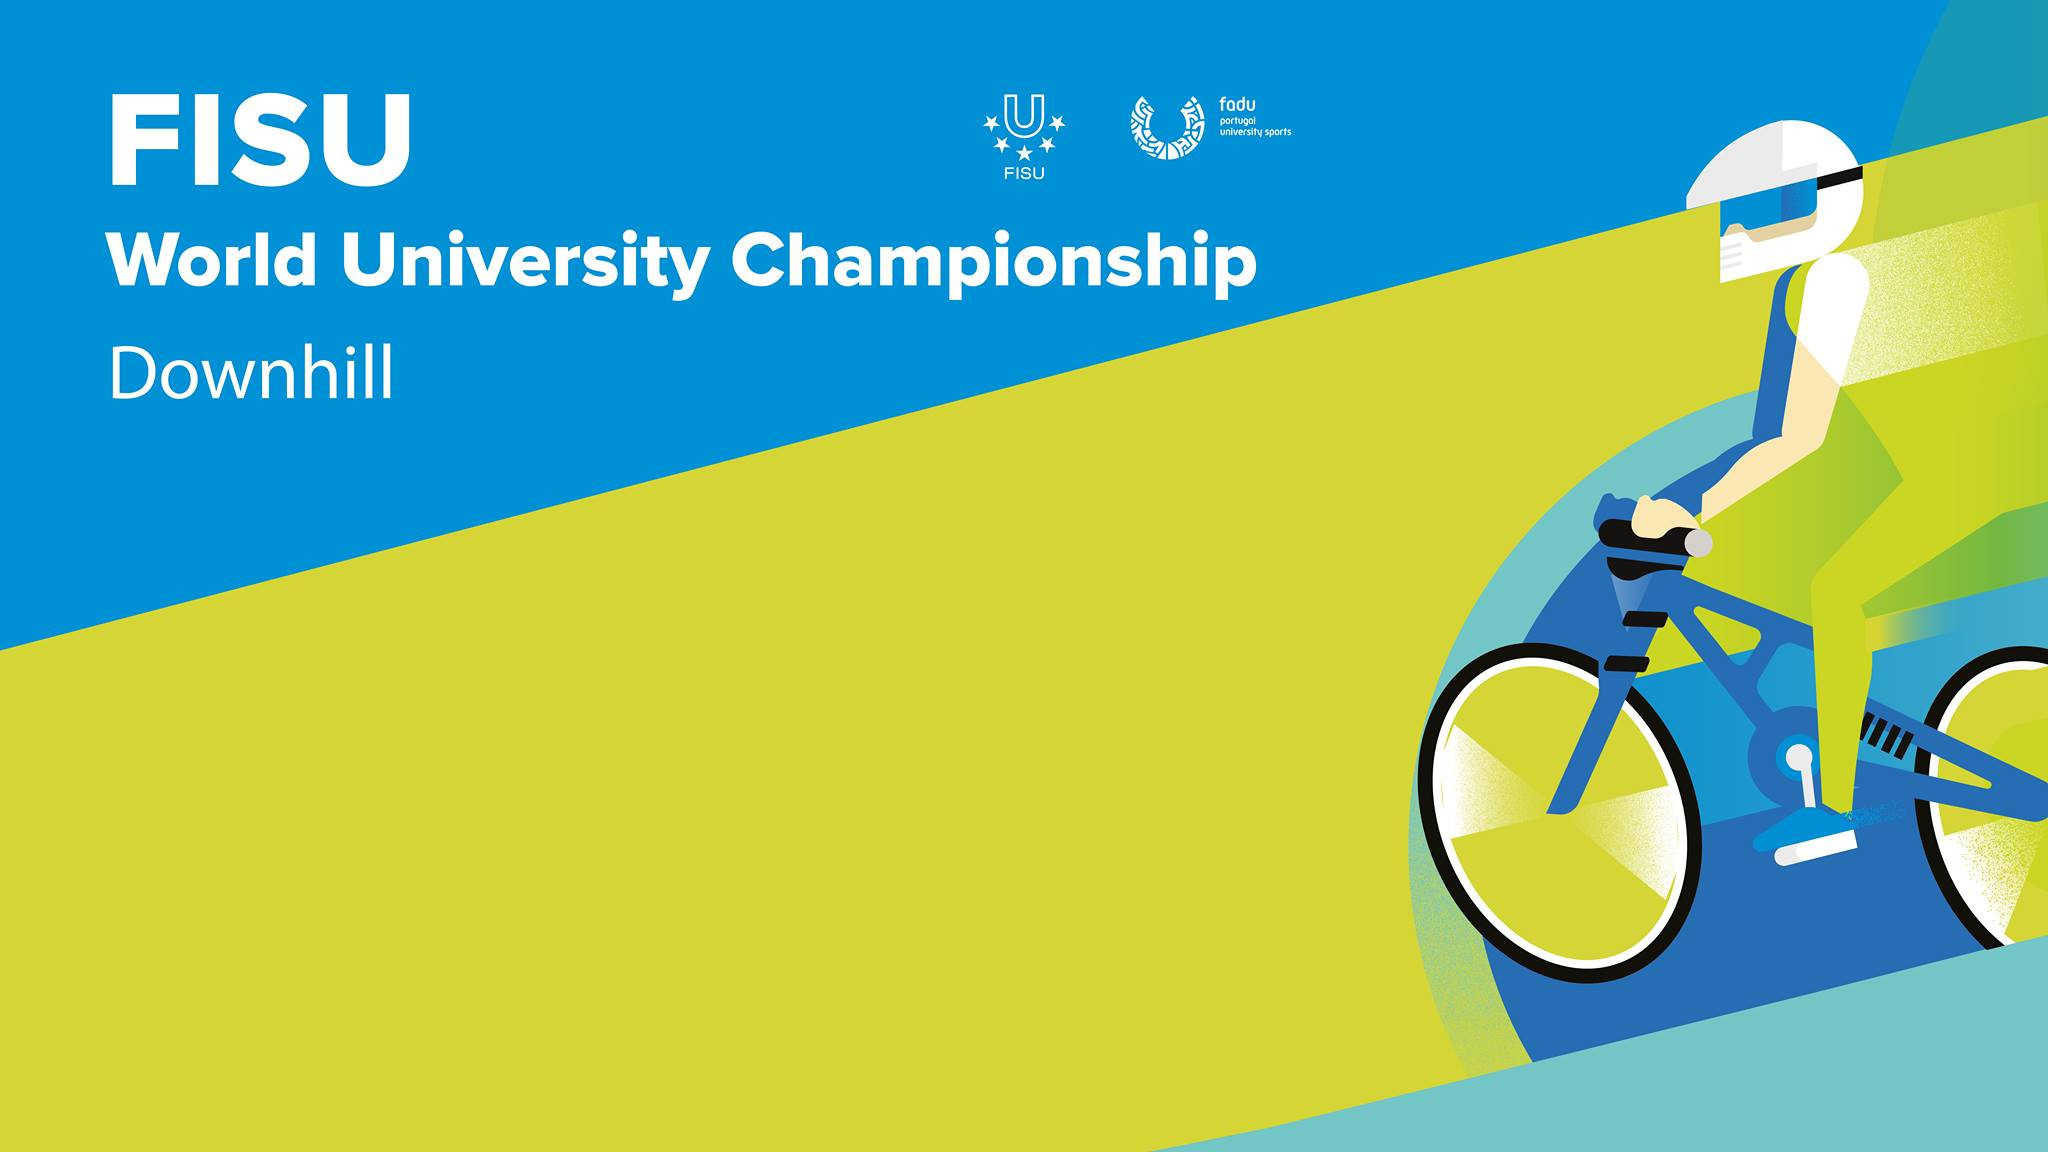 Portugal and Germany win downhill gold medals at World University Cycling Championships